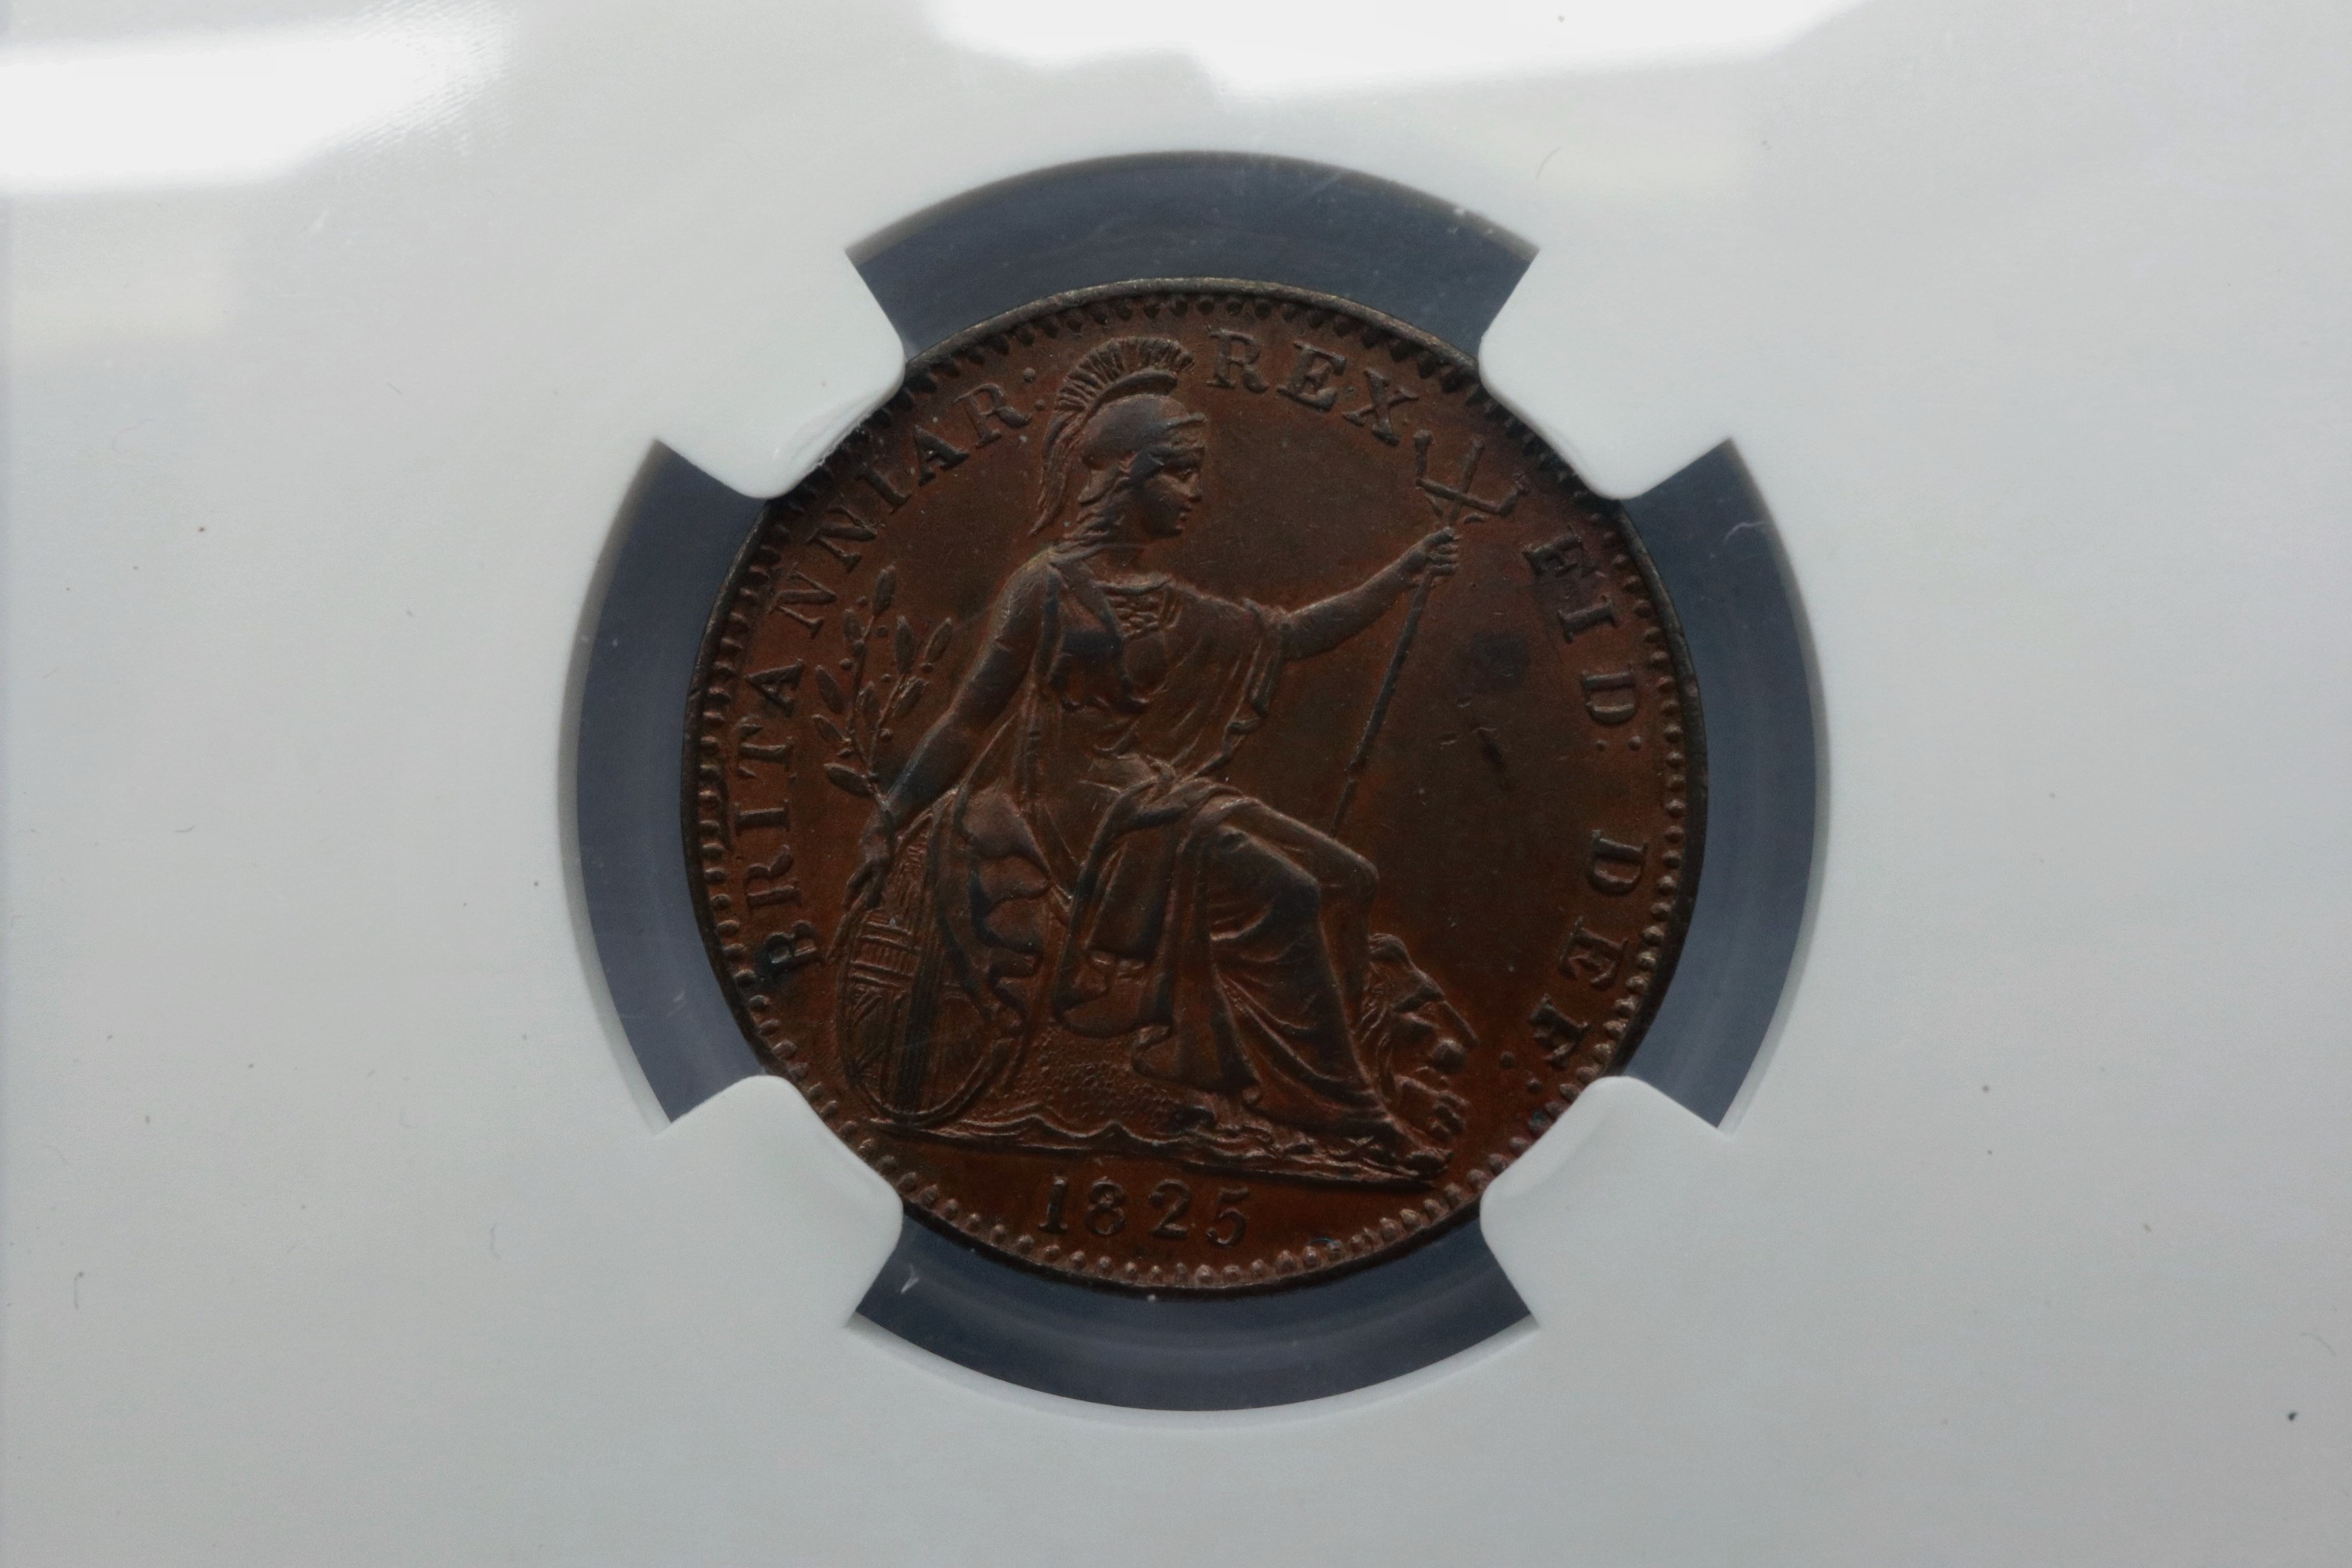 Slabbed and graded 1825 farthing (NGC MS62BN). P&P Group 1 (£14+VAT for the first lot and £1+VAT for